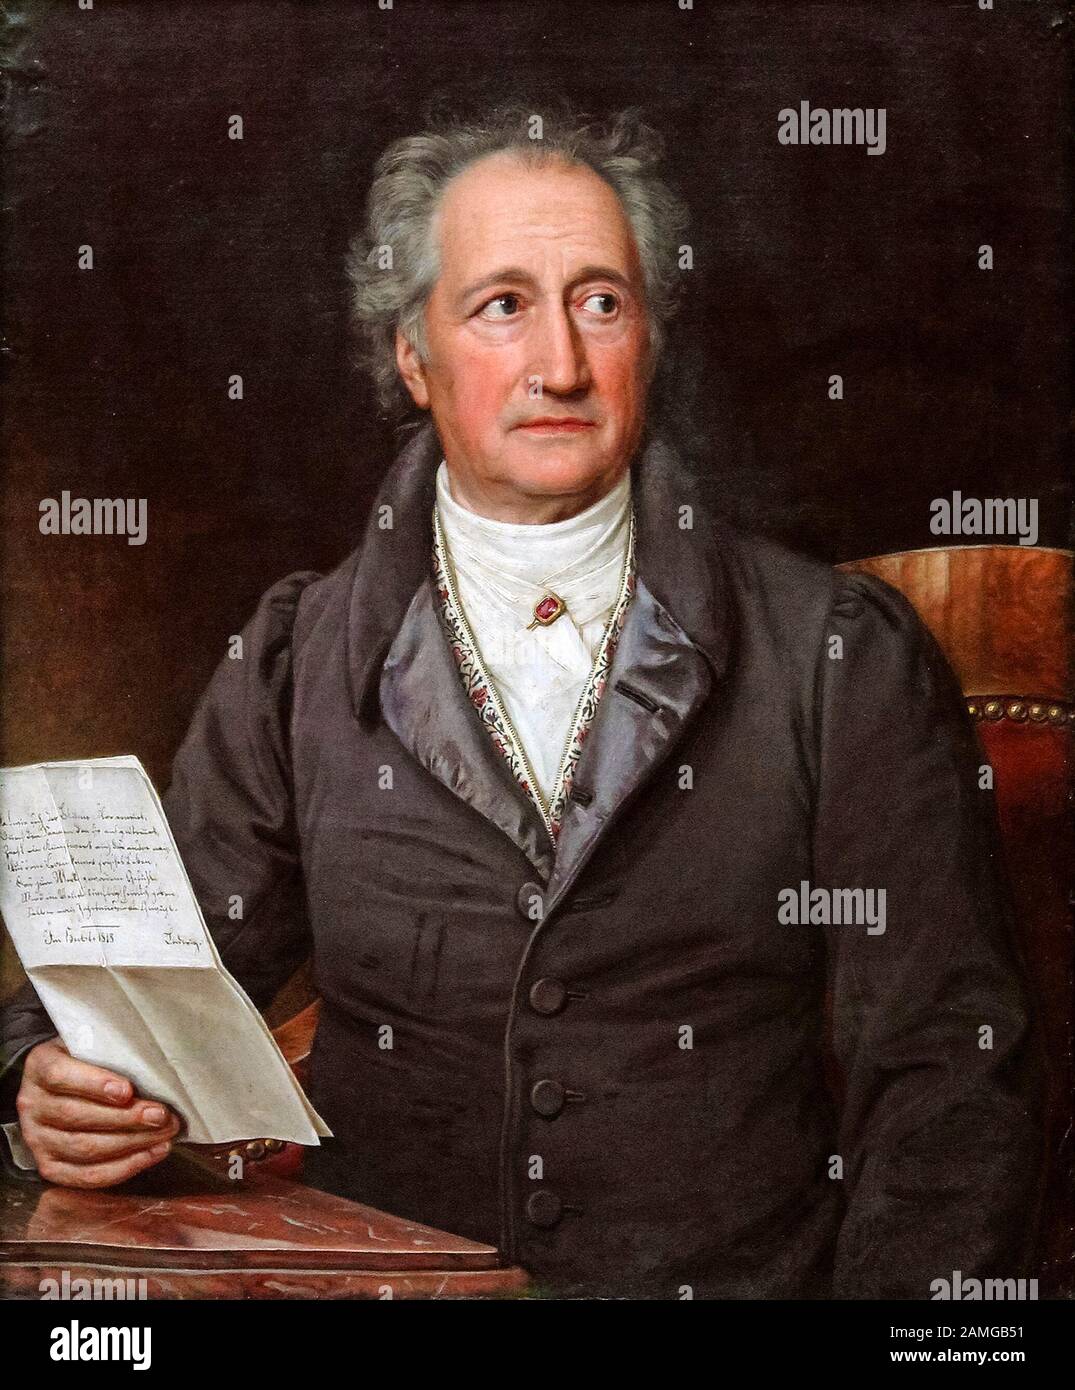 Johann Wolfgang von Goethe (1749-1832) at the age of 79, portrait painting by Joseph Karl Stieler, 1828 Stock Photo